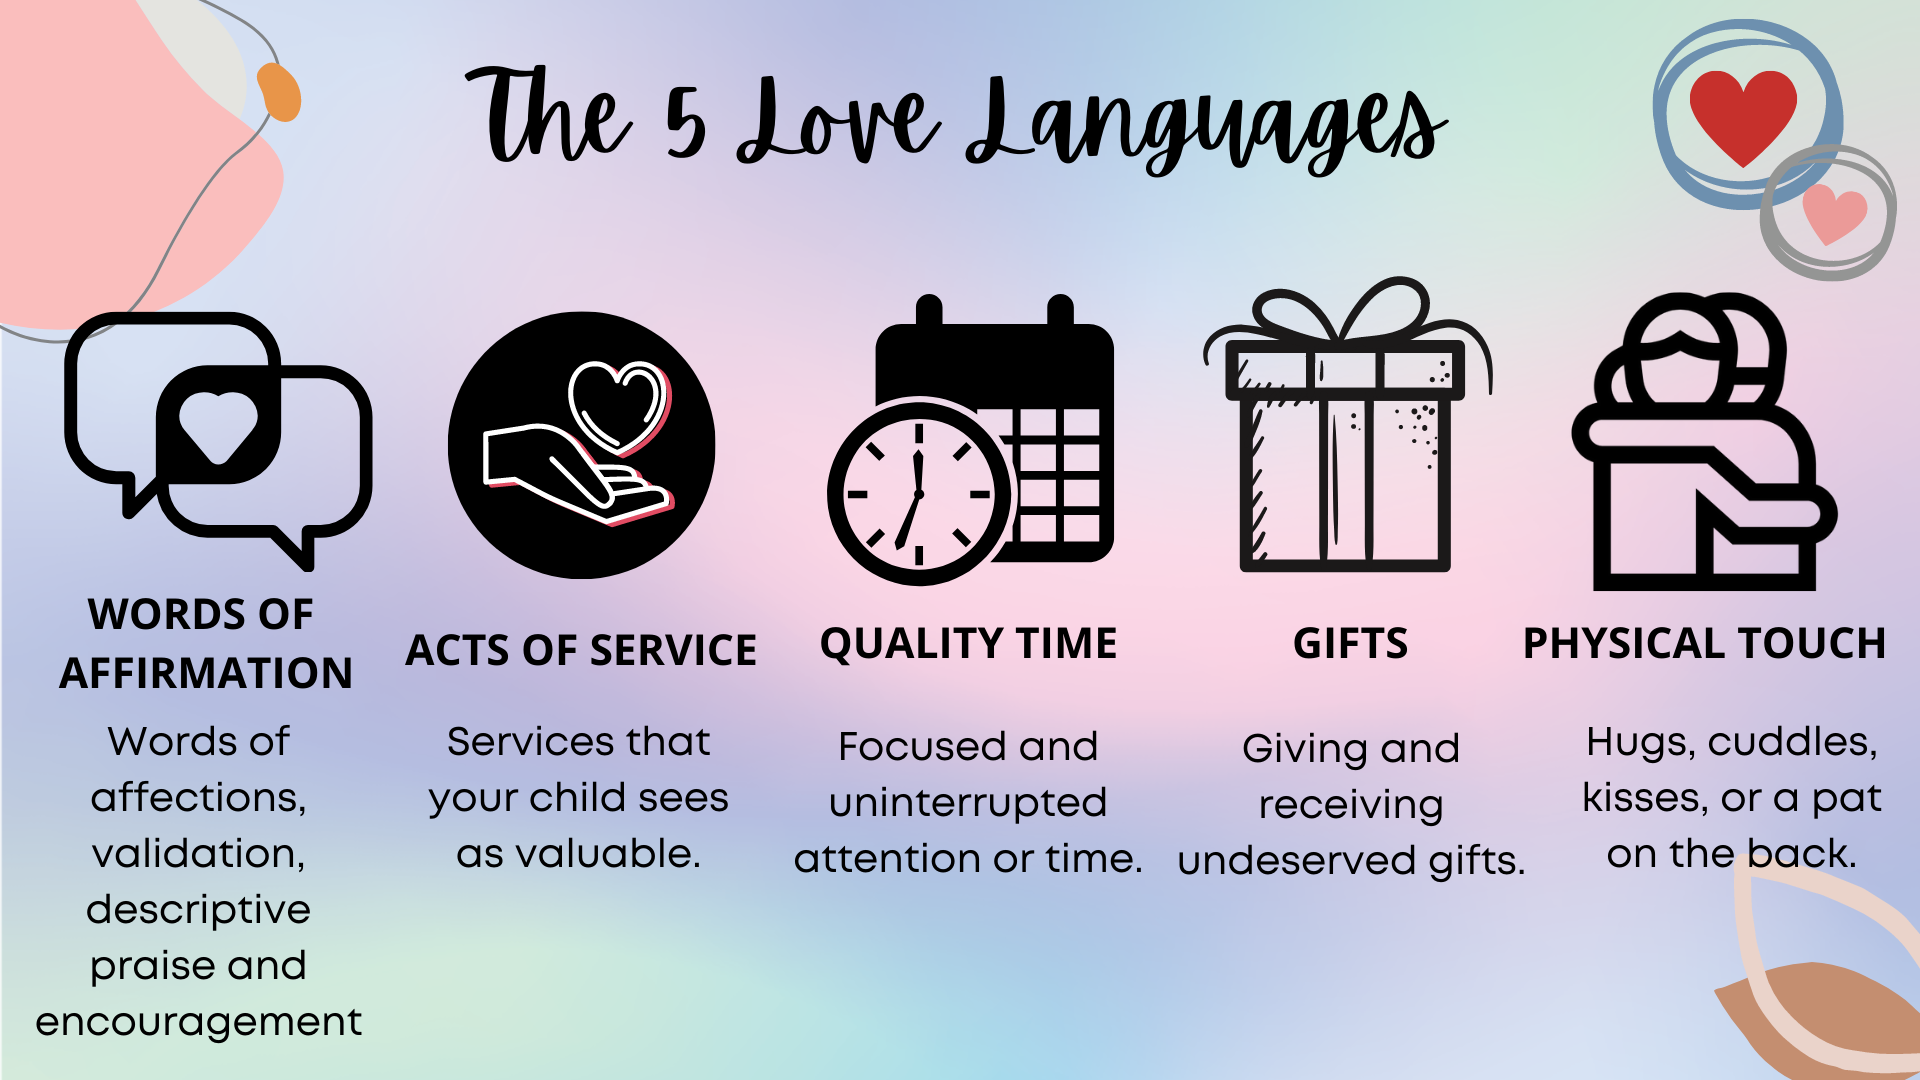 The Five Love Languages Acts Of Service Telegraph